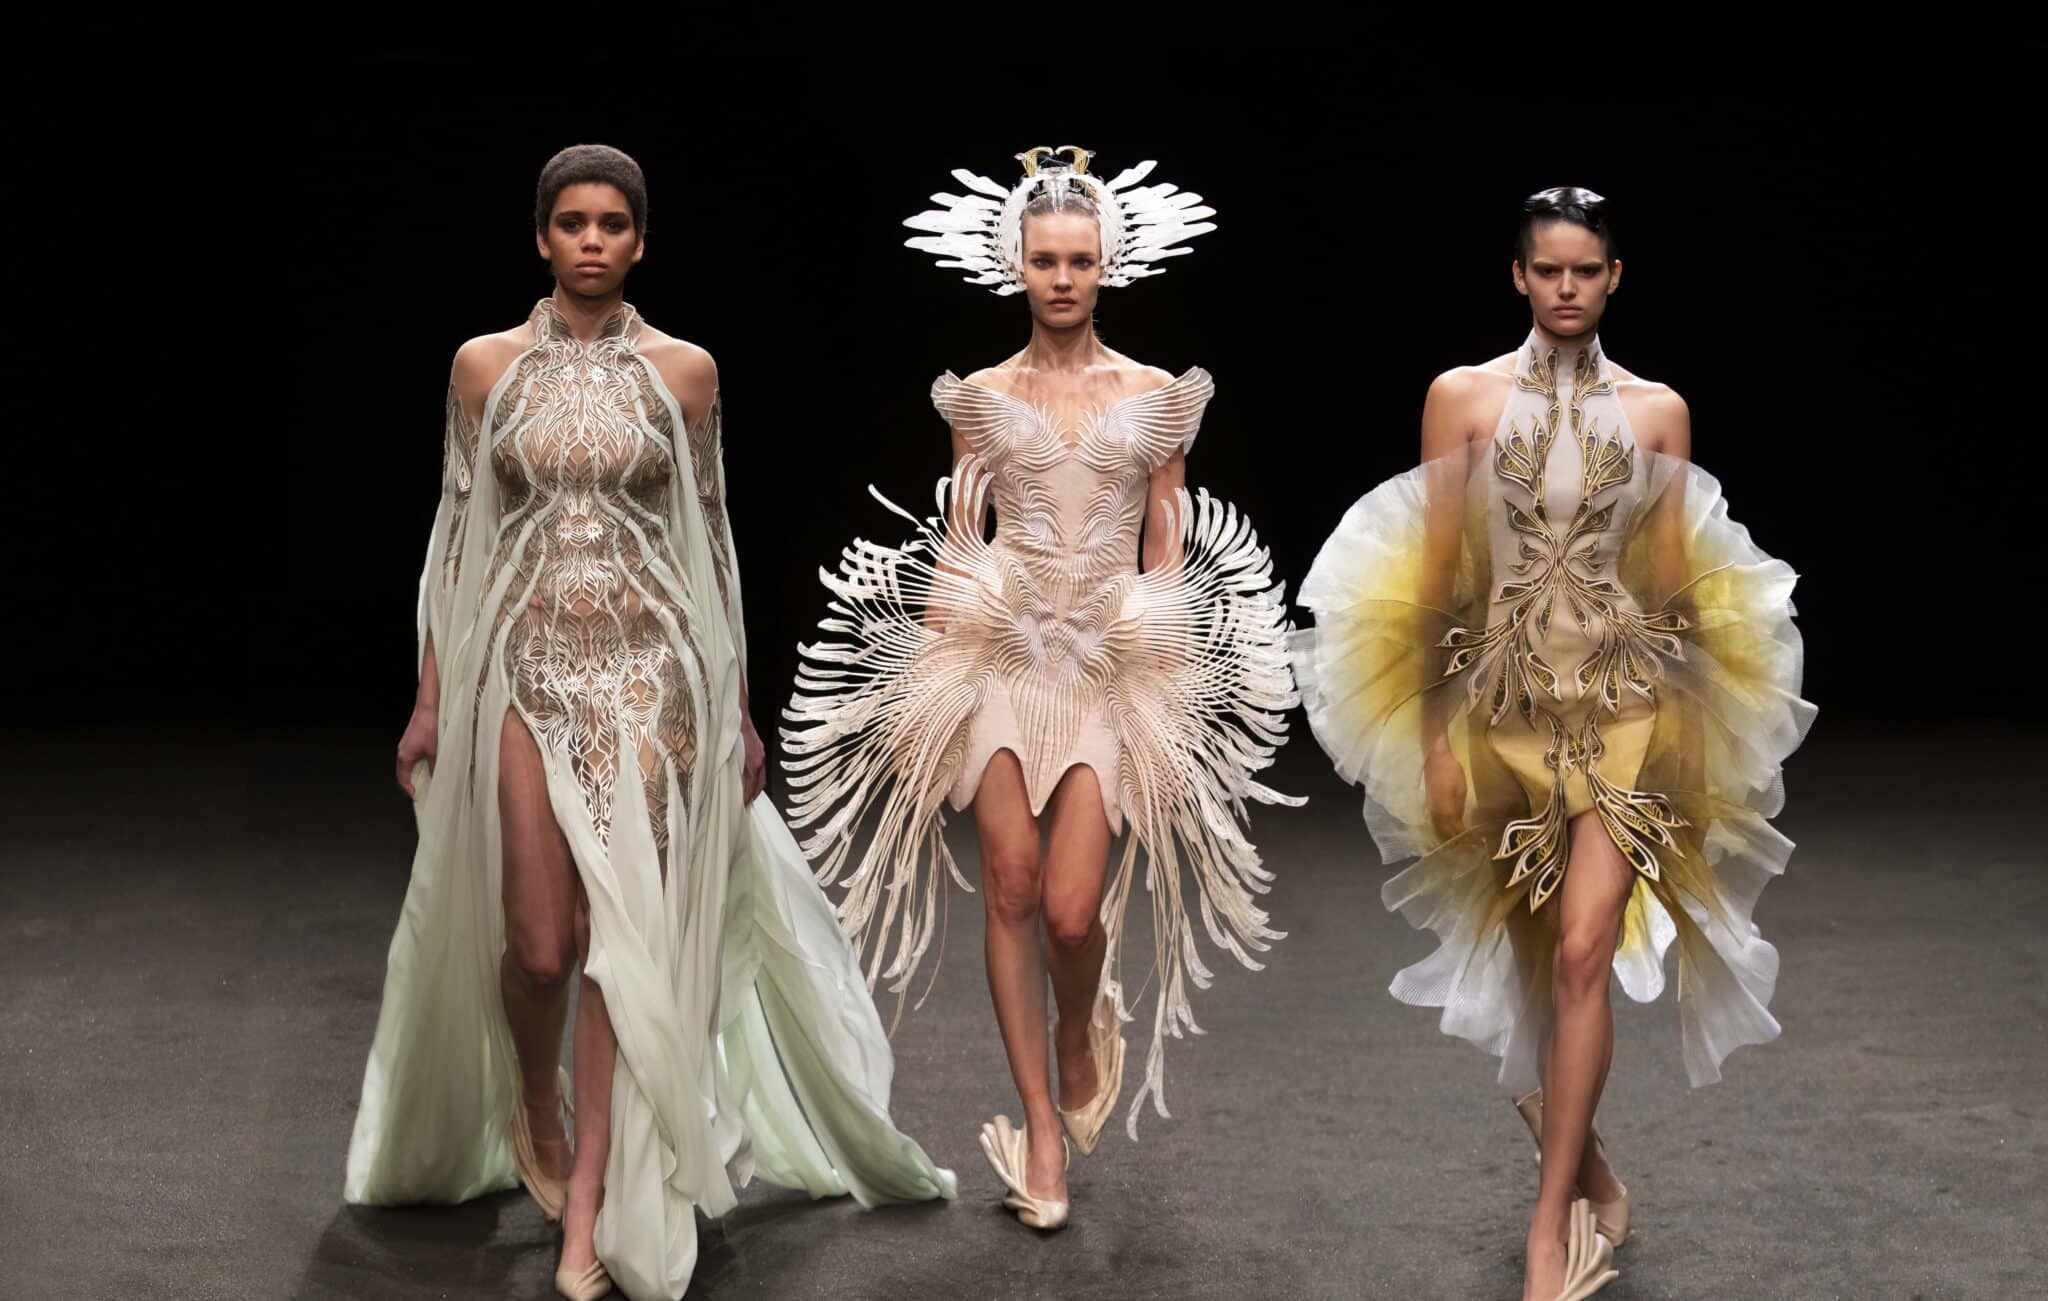 https://mastersexpo.com/wp-content/uploads/2022/07/Finale-Iris-van-Herpen-Couture-SS21-Roots-of-Rebirth-Photographed-by-Gio-Staiano-3-scaled-1.jpg